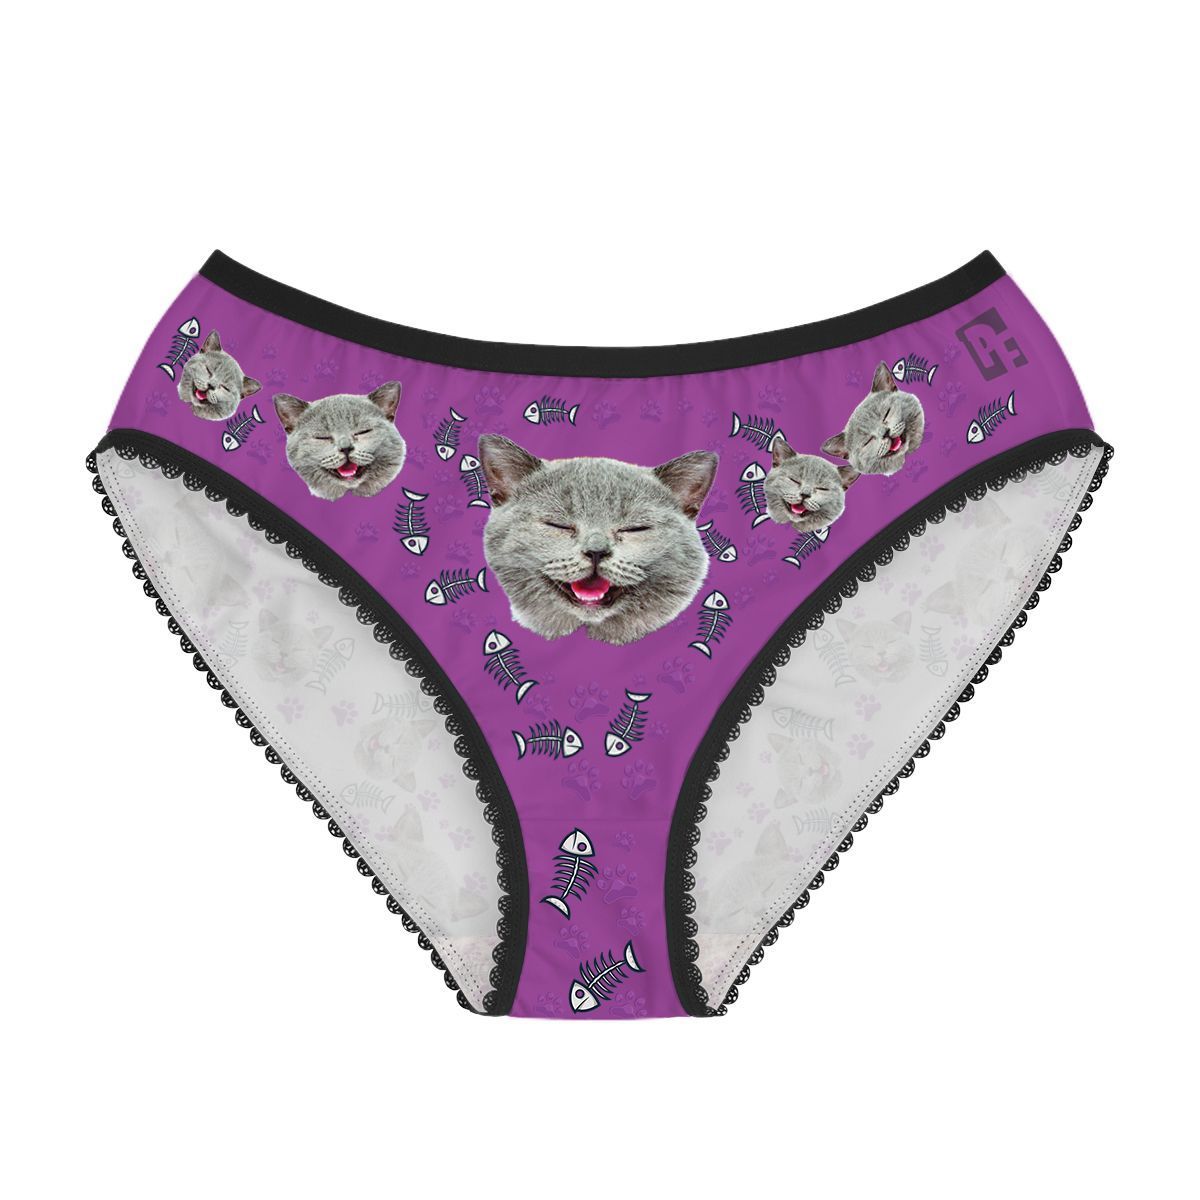 Purple Cat women's underwear briefs personalized with photo printed on them